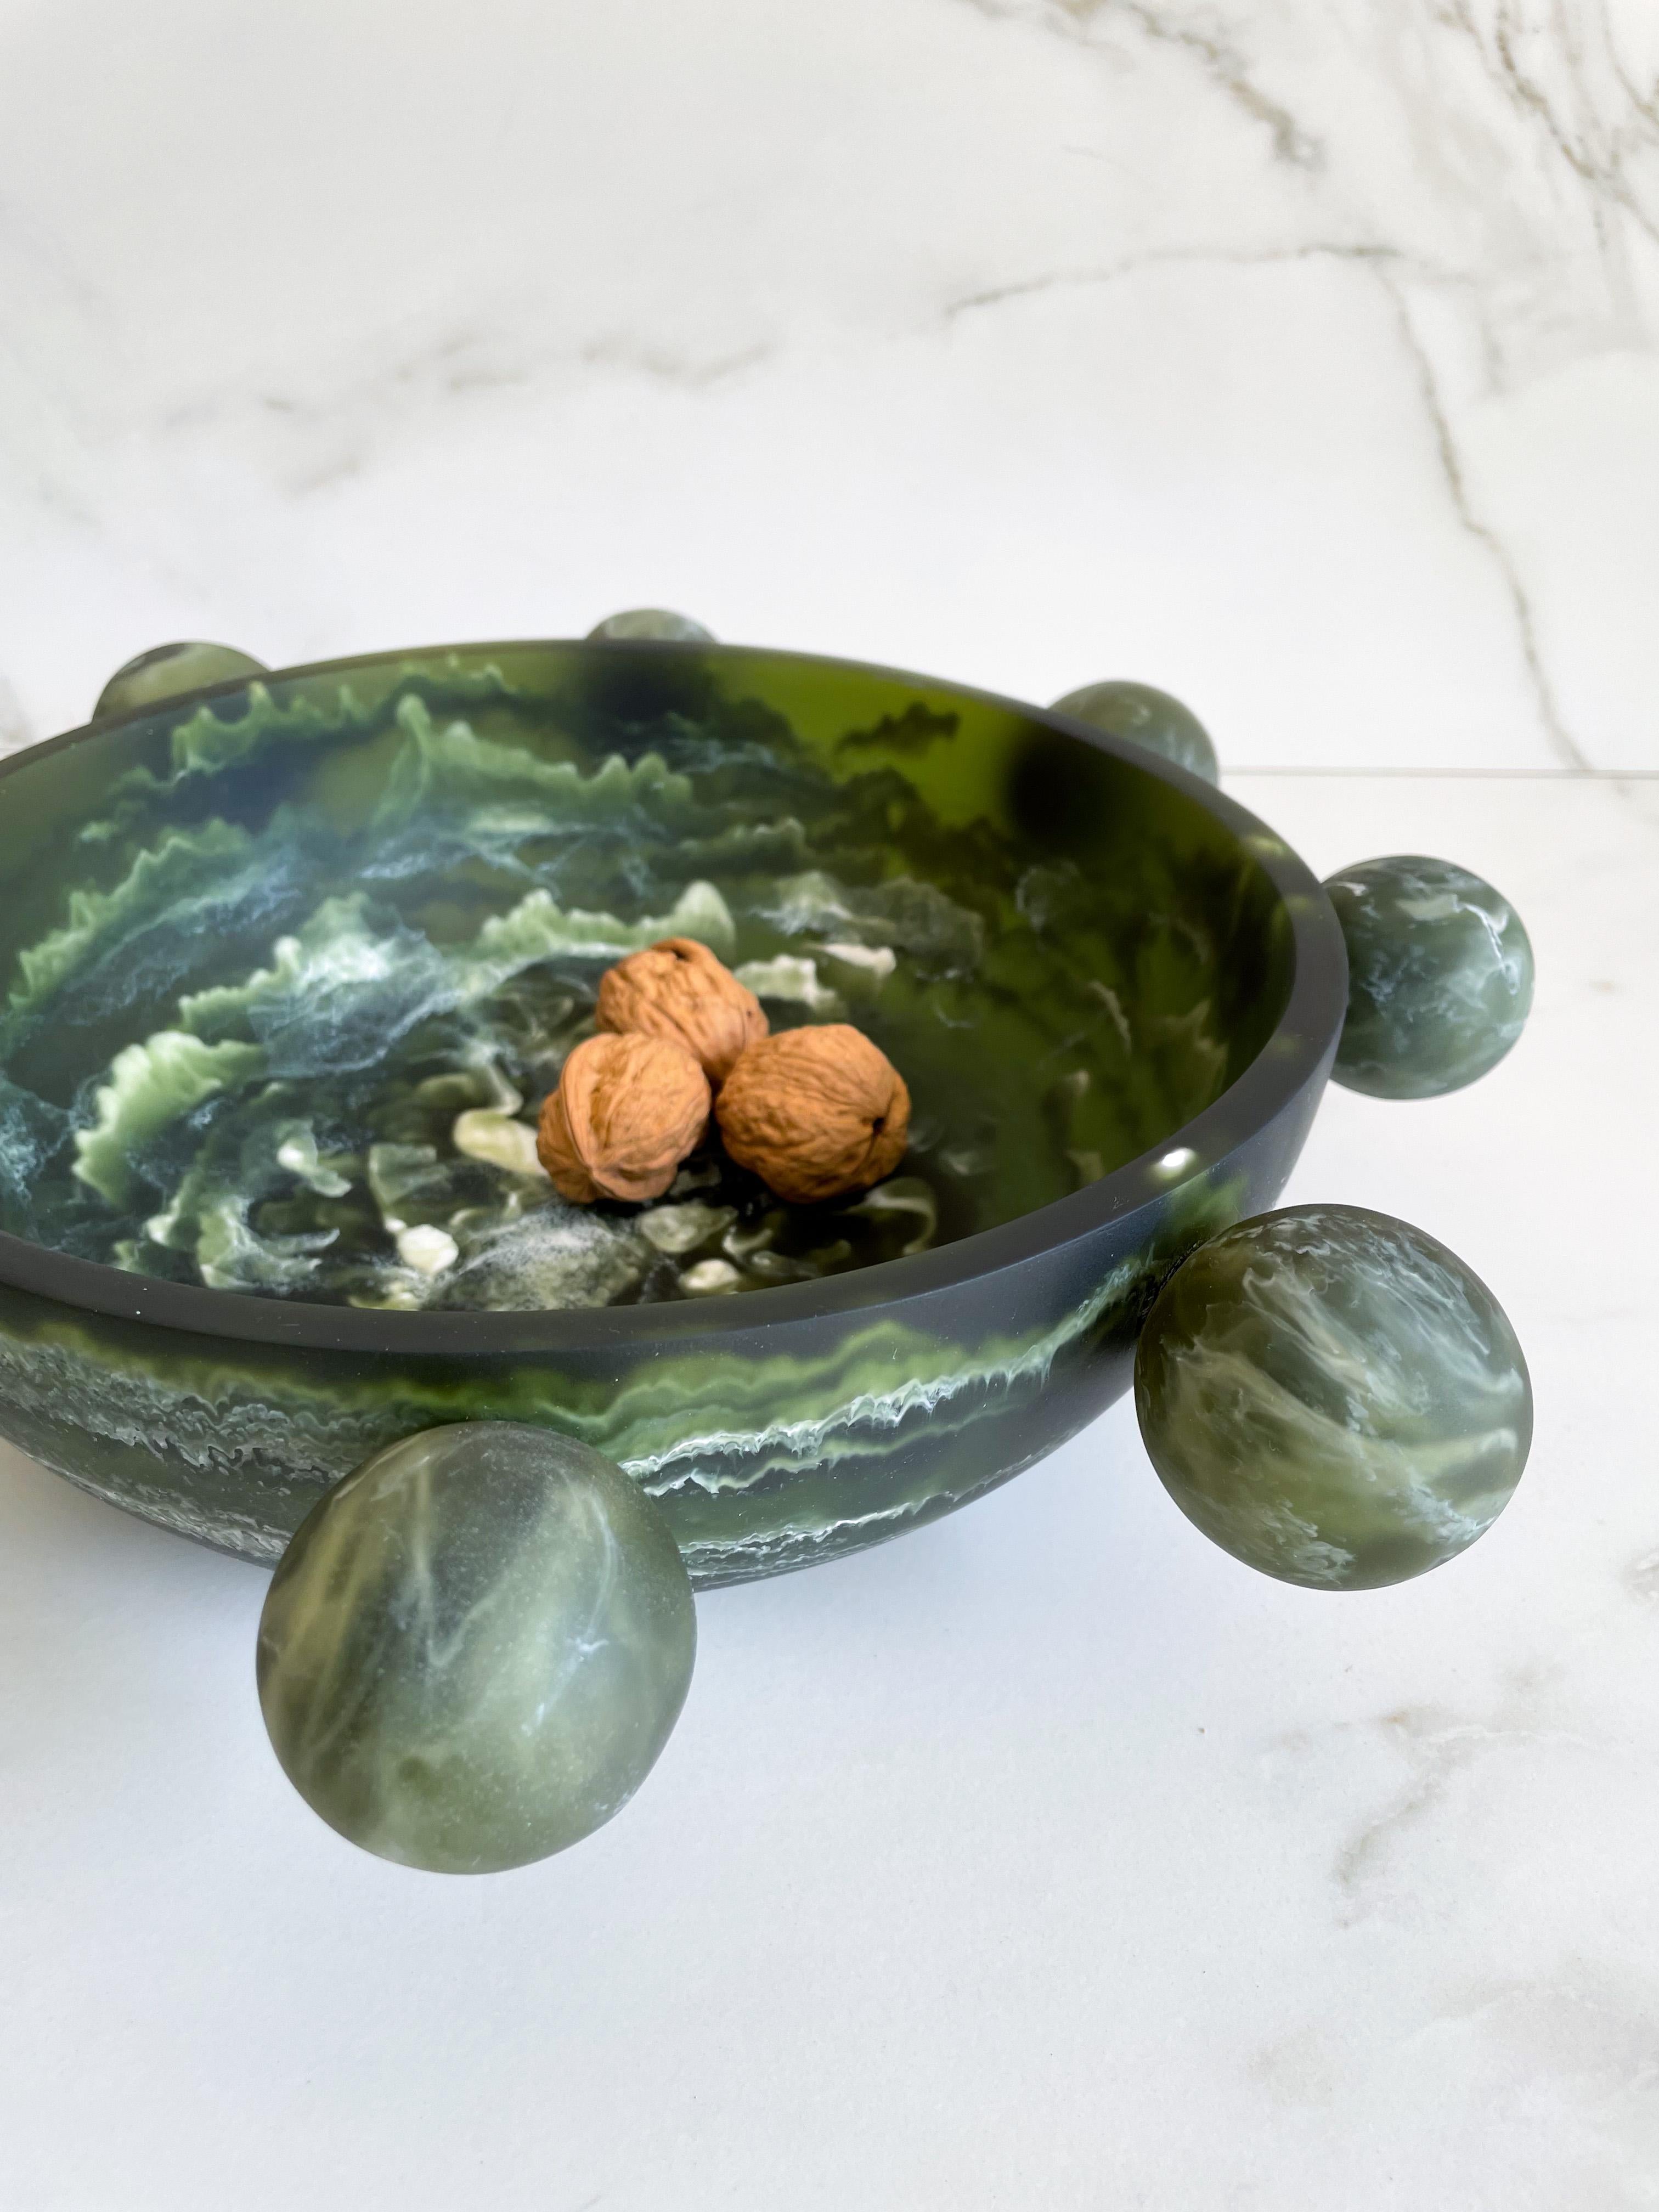 Our Bubble Bowl is handmade in dark green & white marbled resin. Its modern, fun and unique design makes it a statement piece and can be used as decor or as a fruit platter.

Designed by Paola Valle and manufactured in Mexico City by extraordinary